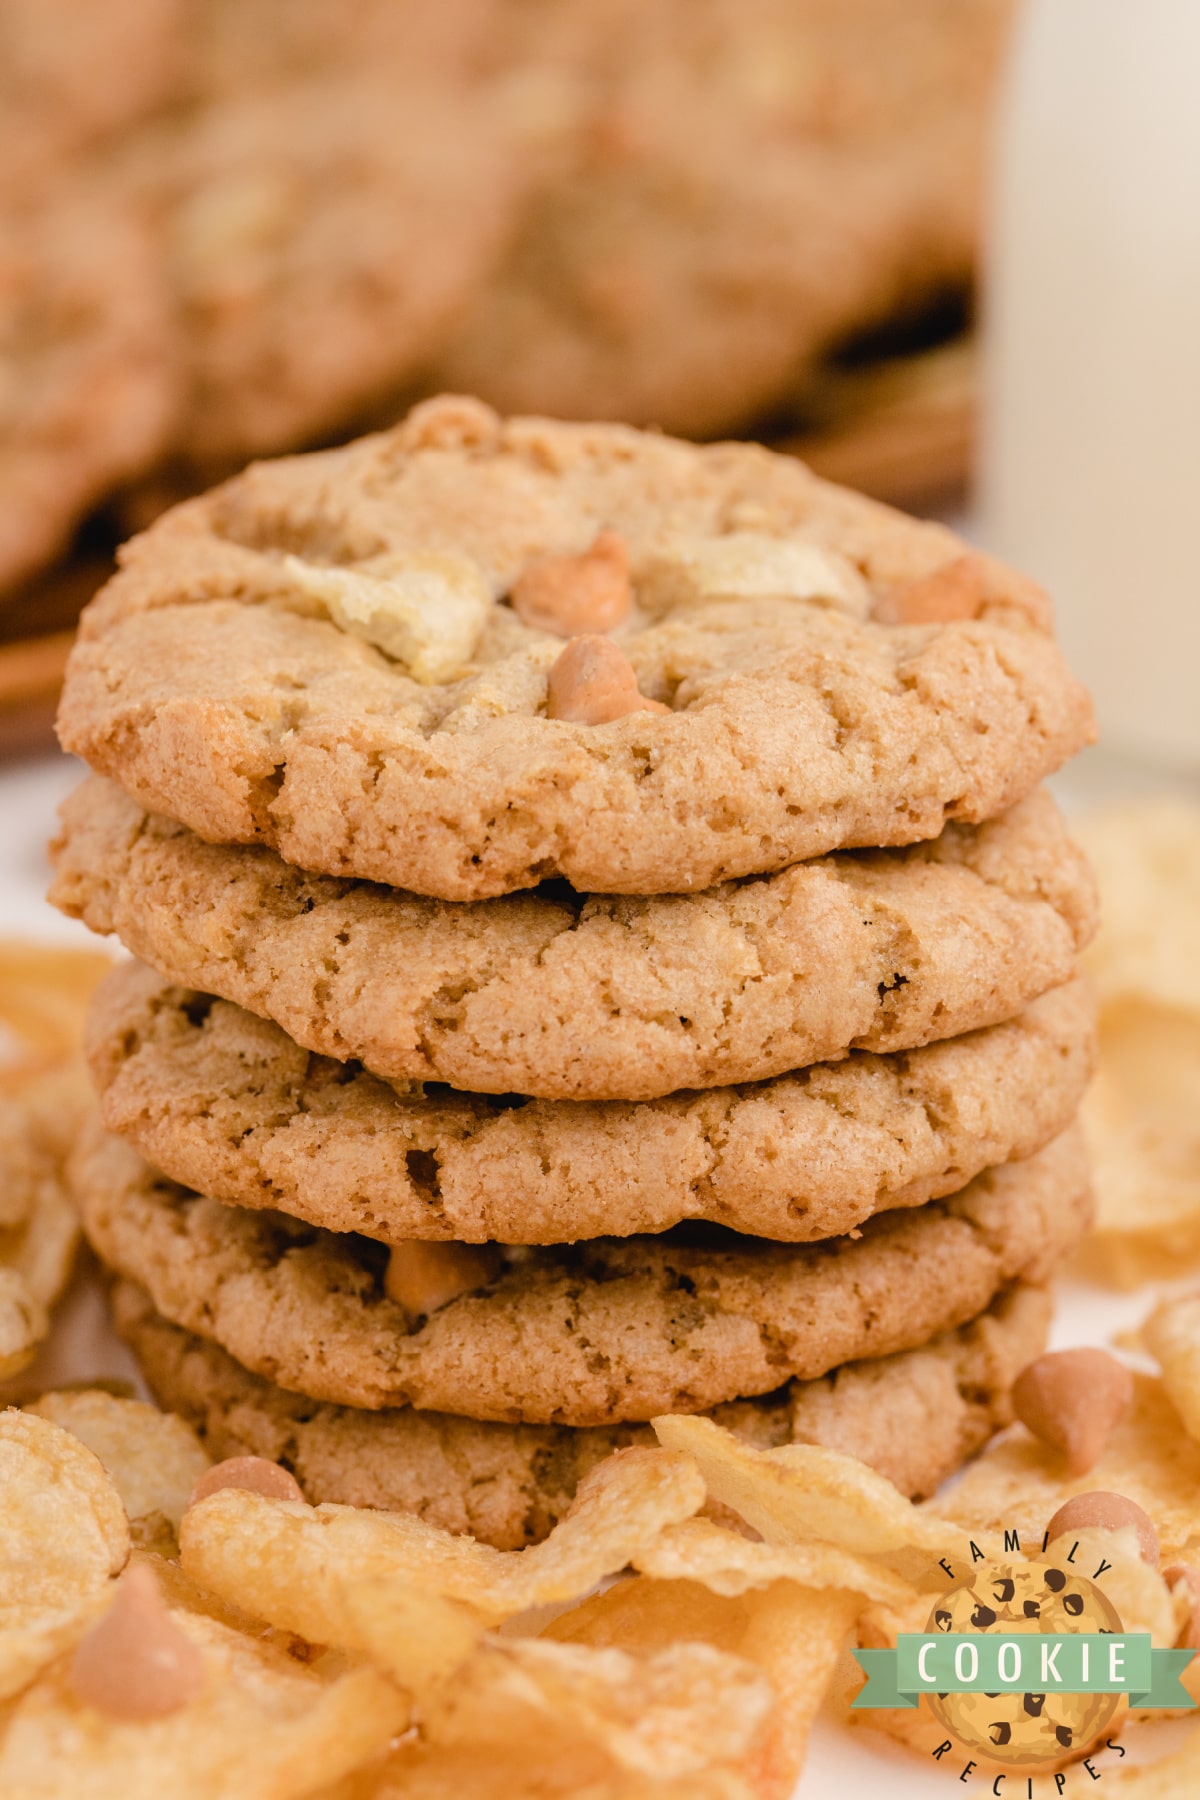 Cookies made with potato chips and butterscotch chips